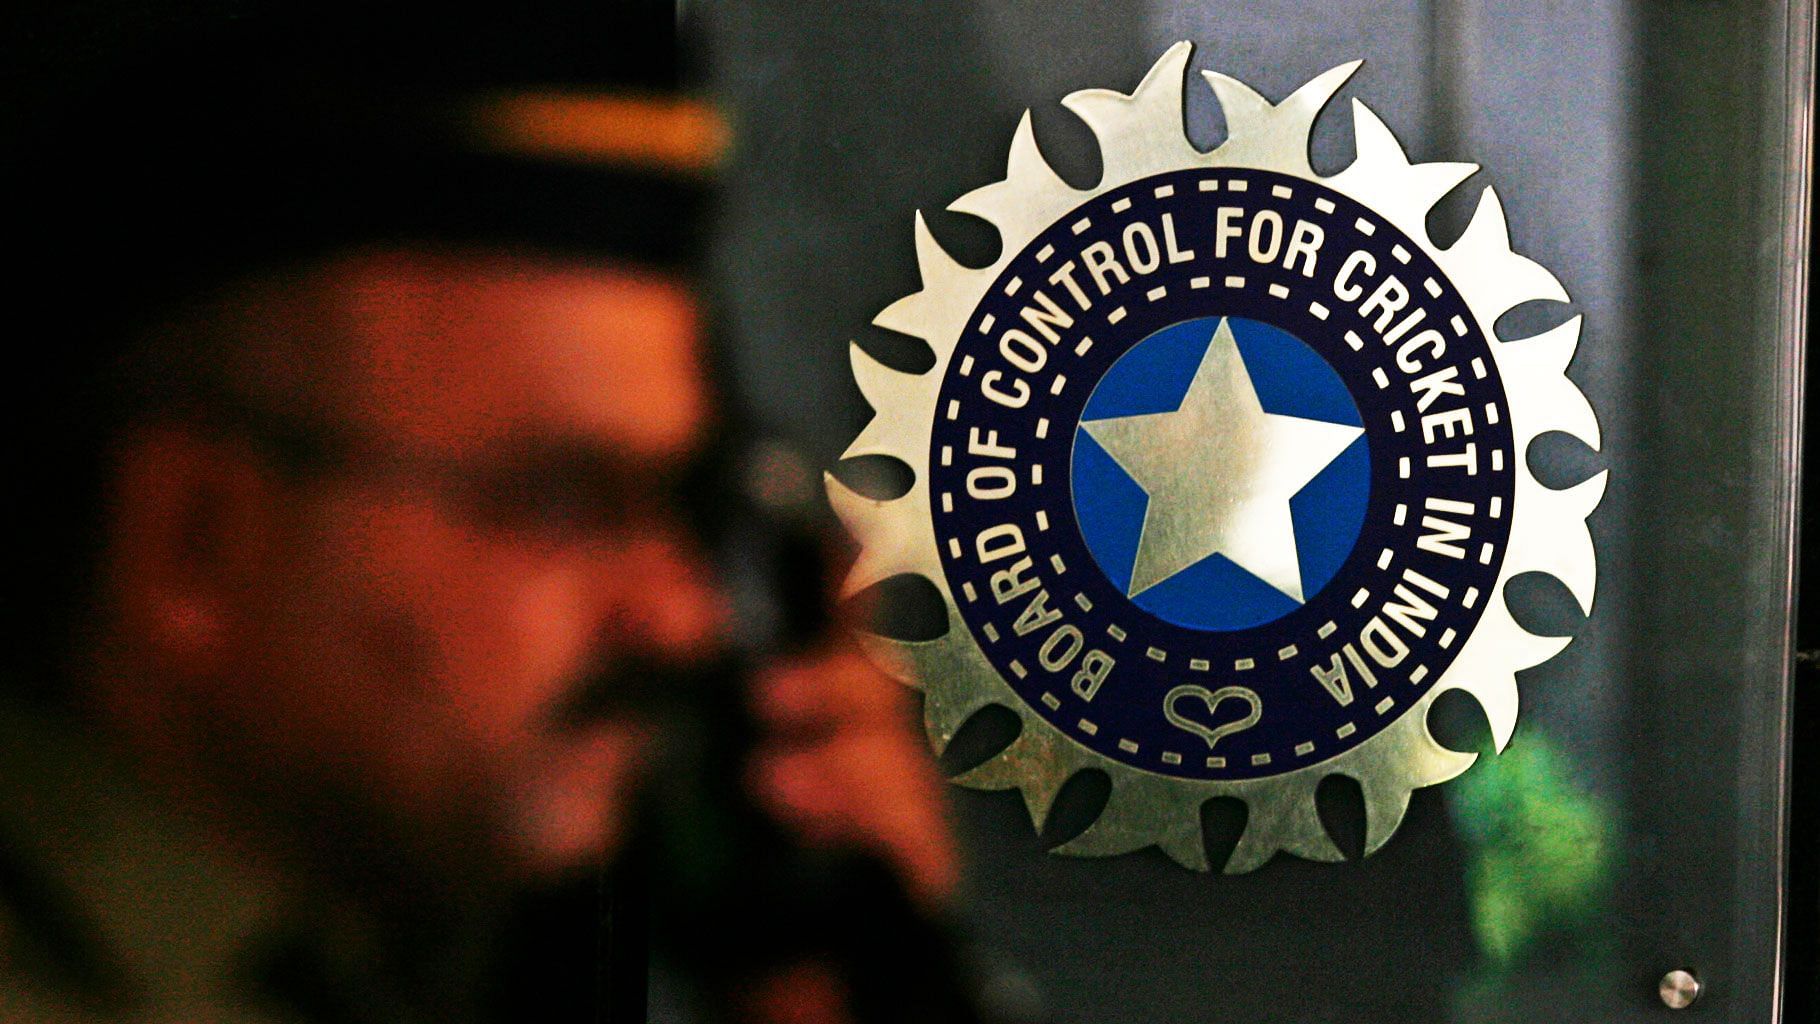 Office bearers of the BCCI, including president Sourav Ganguly and secretary Jay Shah, are also expected to finalise the three-member Cricket Advisory Committee that will interview the candidates for the national selection panel.